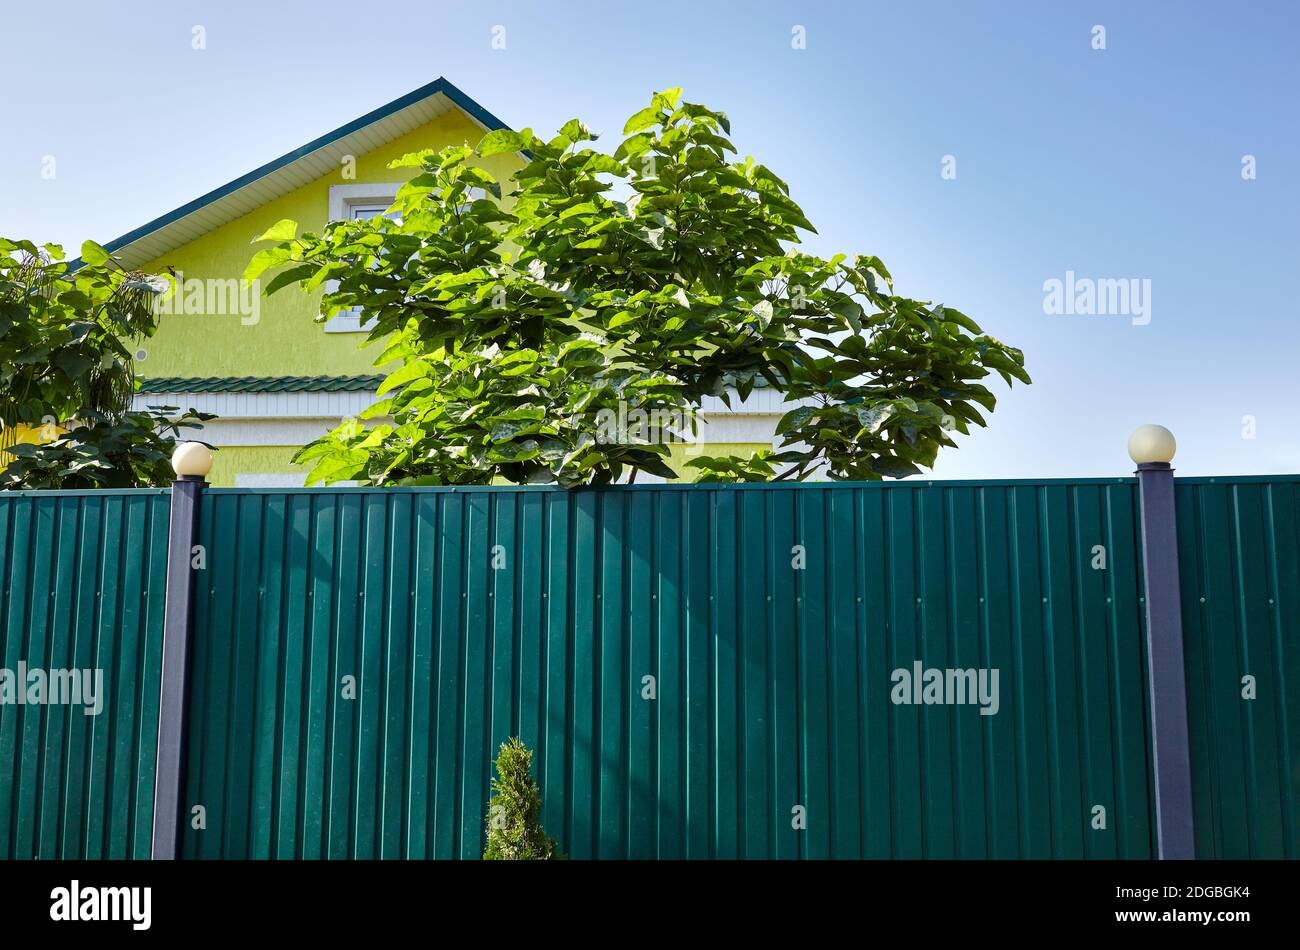 Facade of a yellow suburban building. Metal fence with lanterns against a blue sky Stock Photo